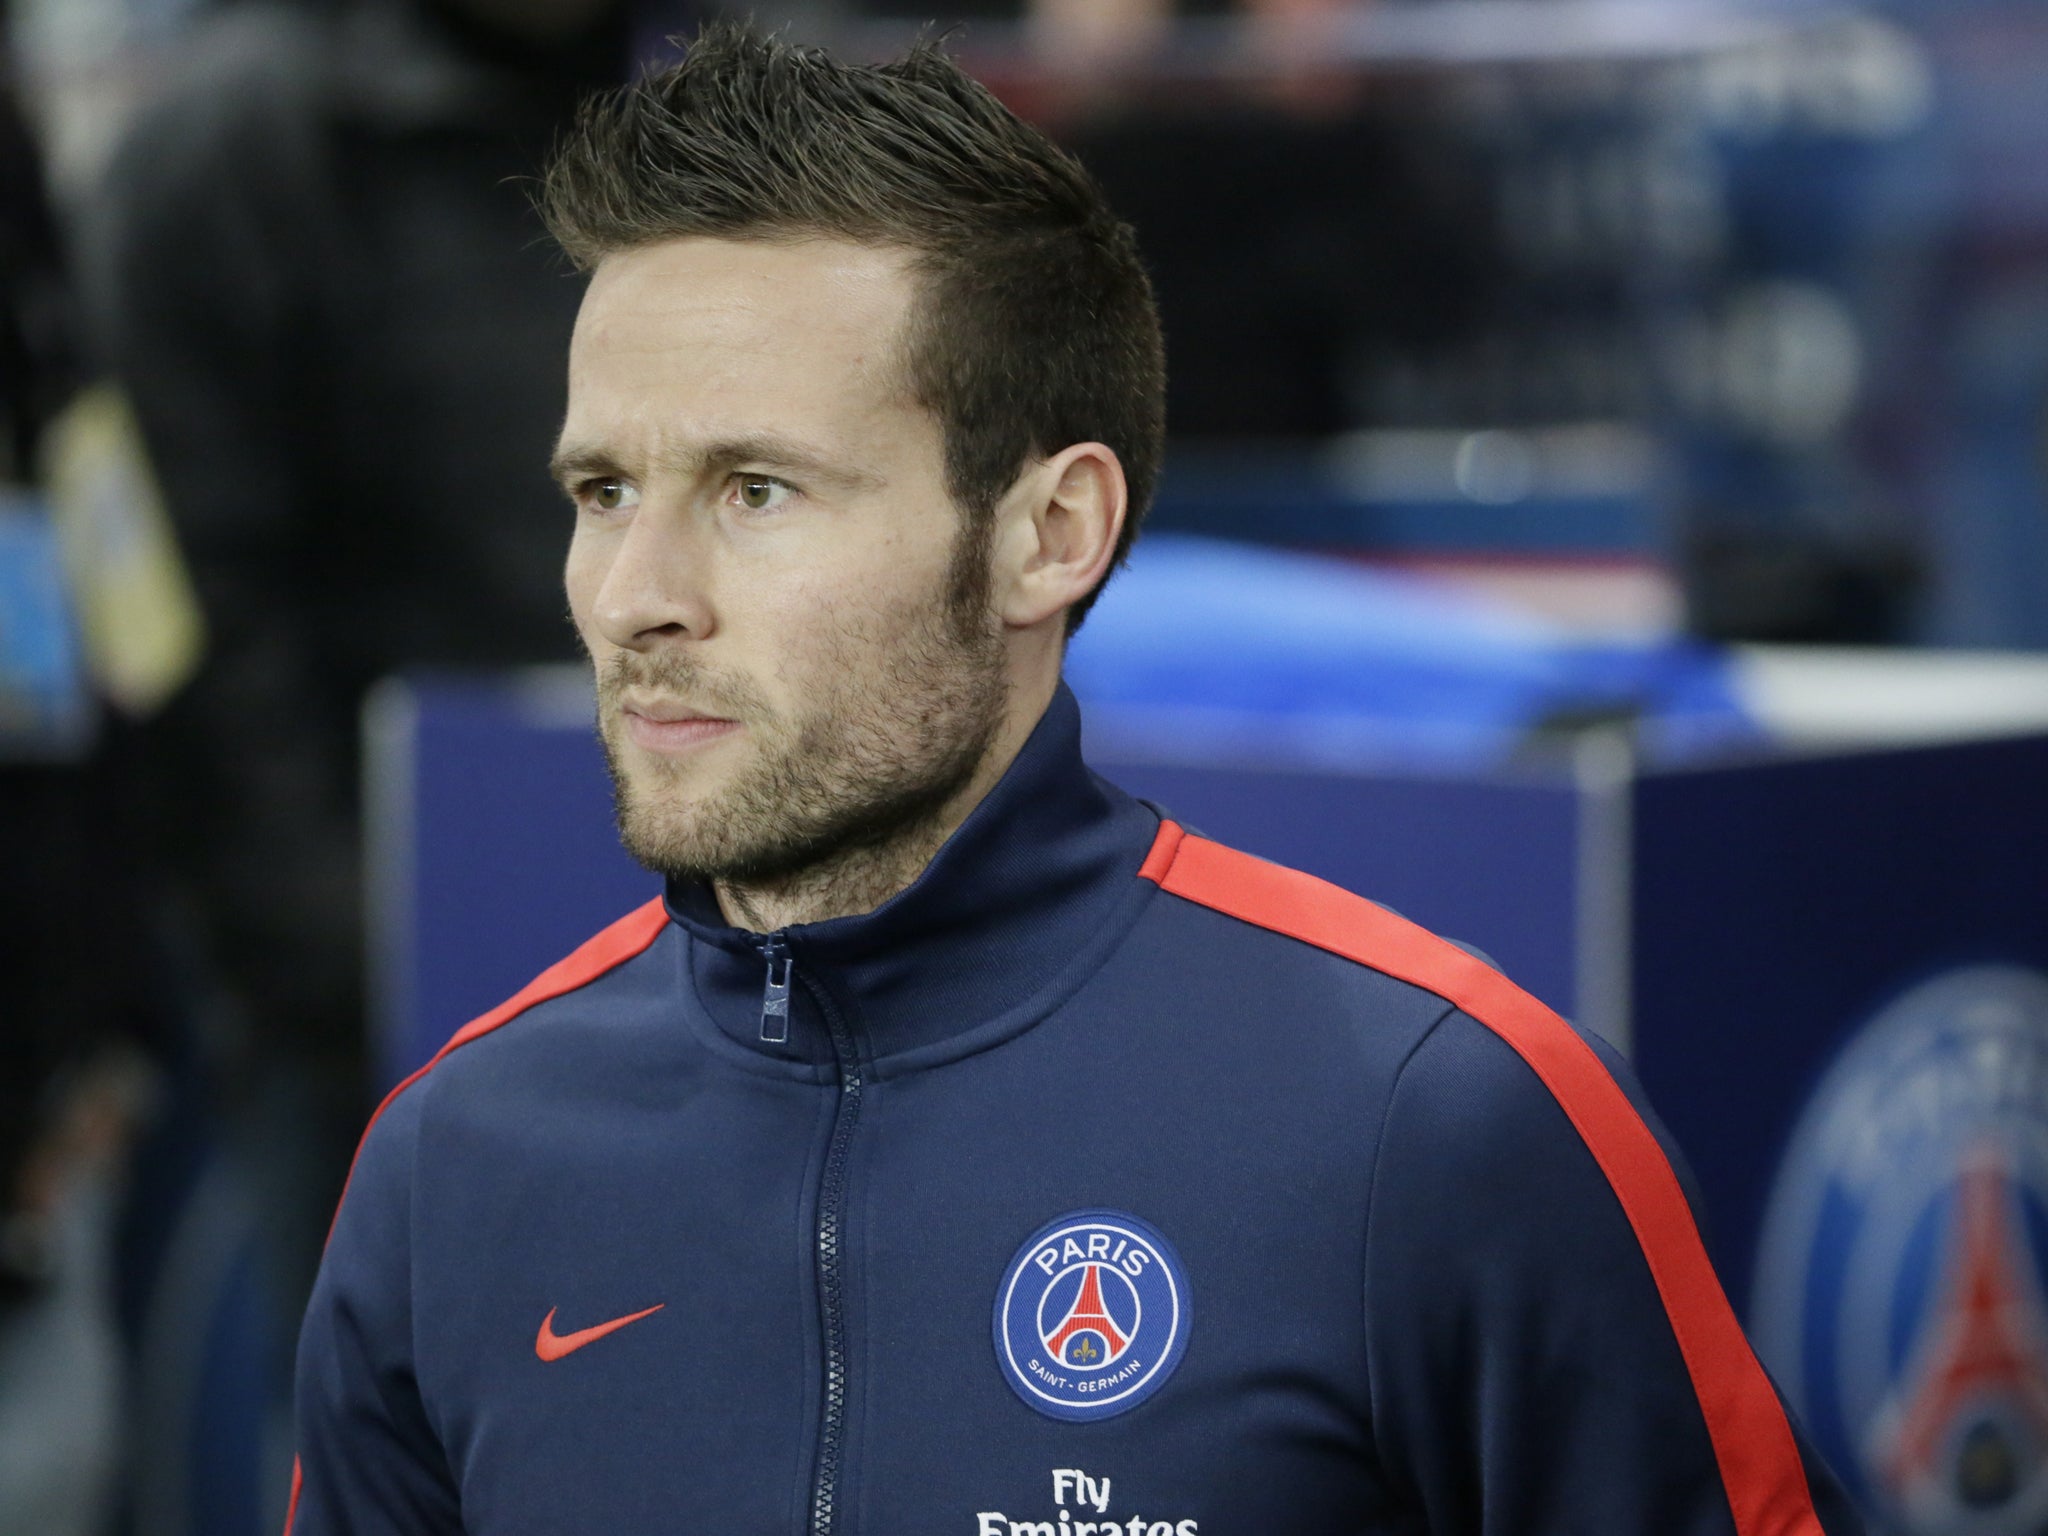 Yohan Cabaye looks on from the bench